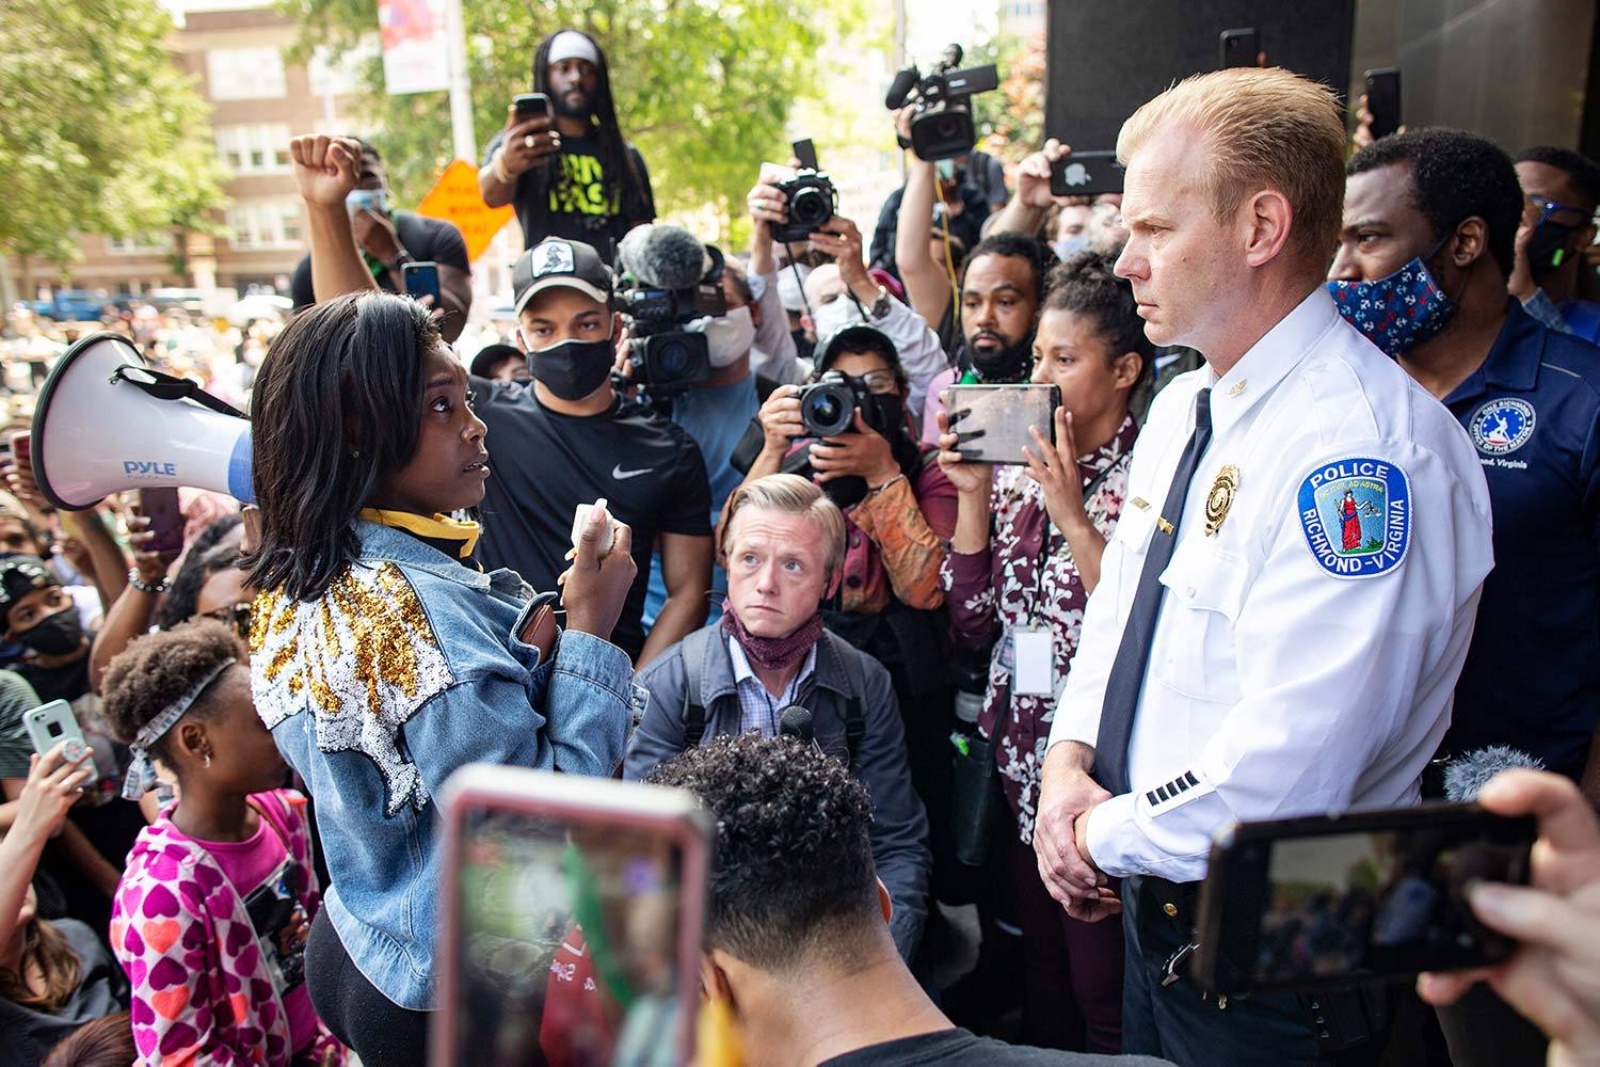 Brian Palmer photograph of female protestor looking at police chief in crowd of protestors